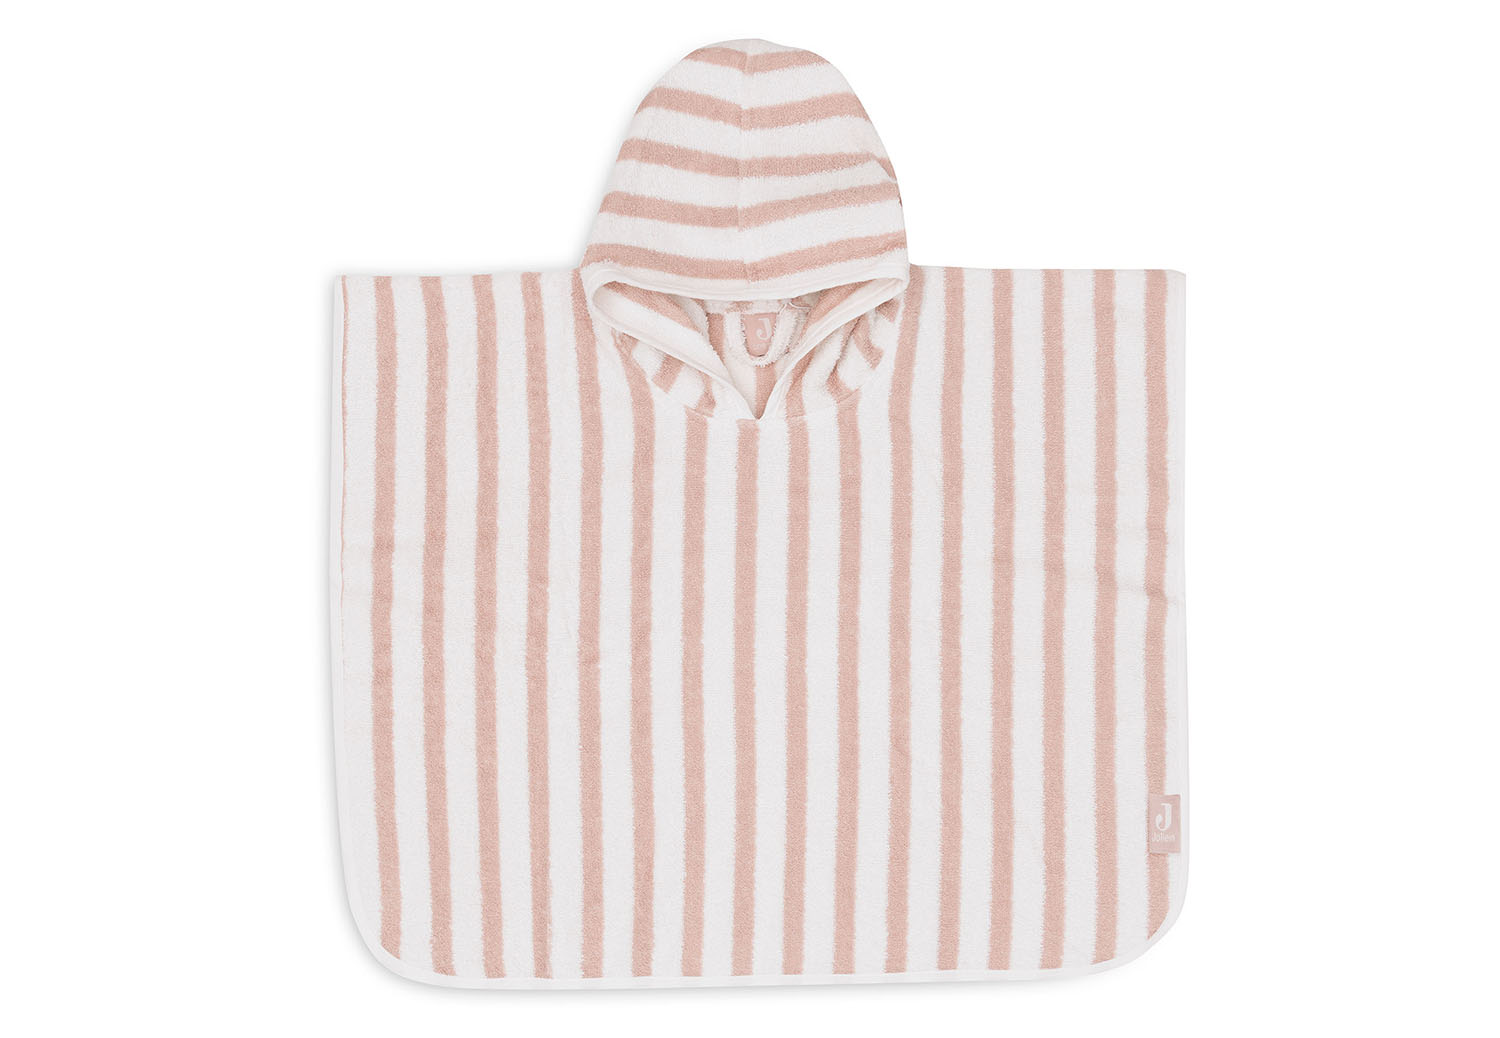 Badeponcho Stripe Frottee rosa / weiß